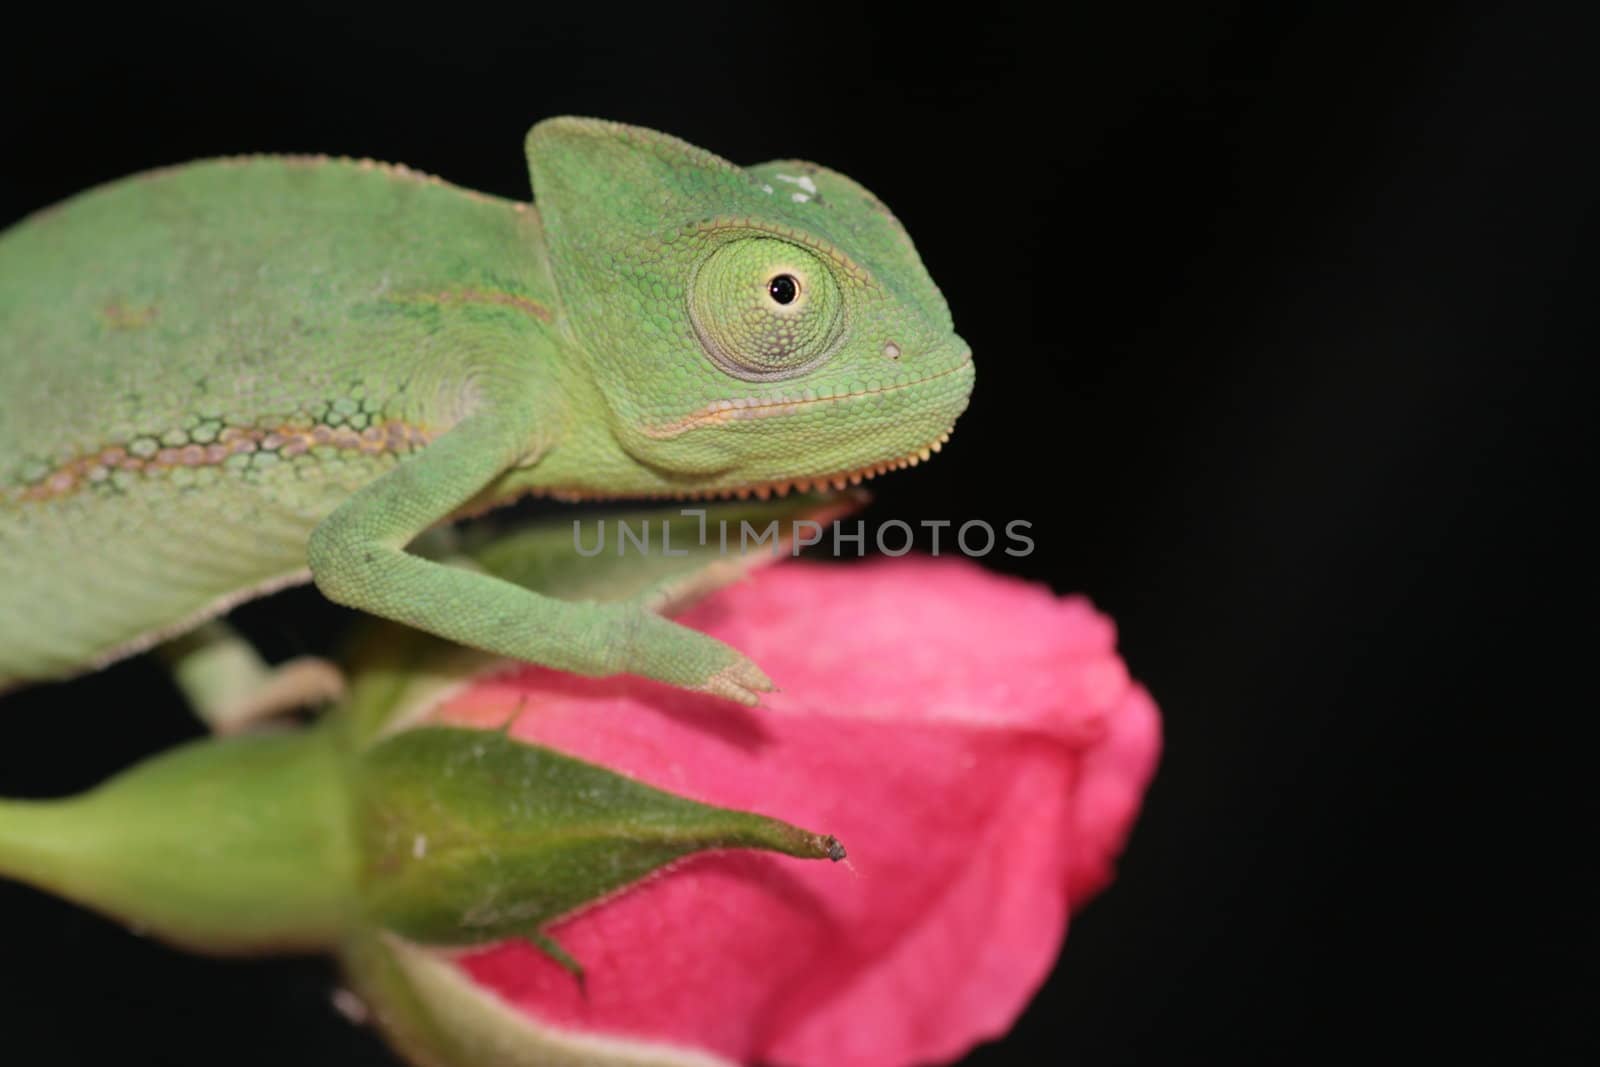 image of a young chameleon